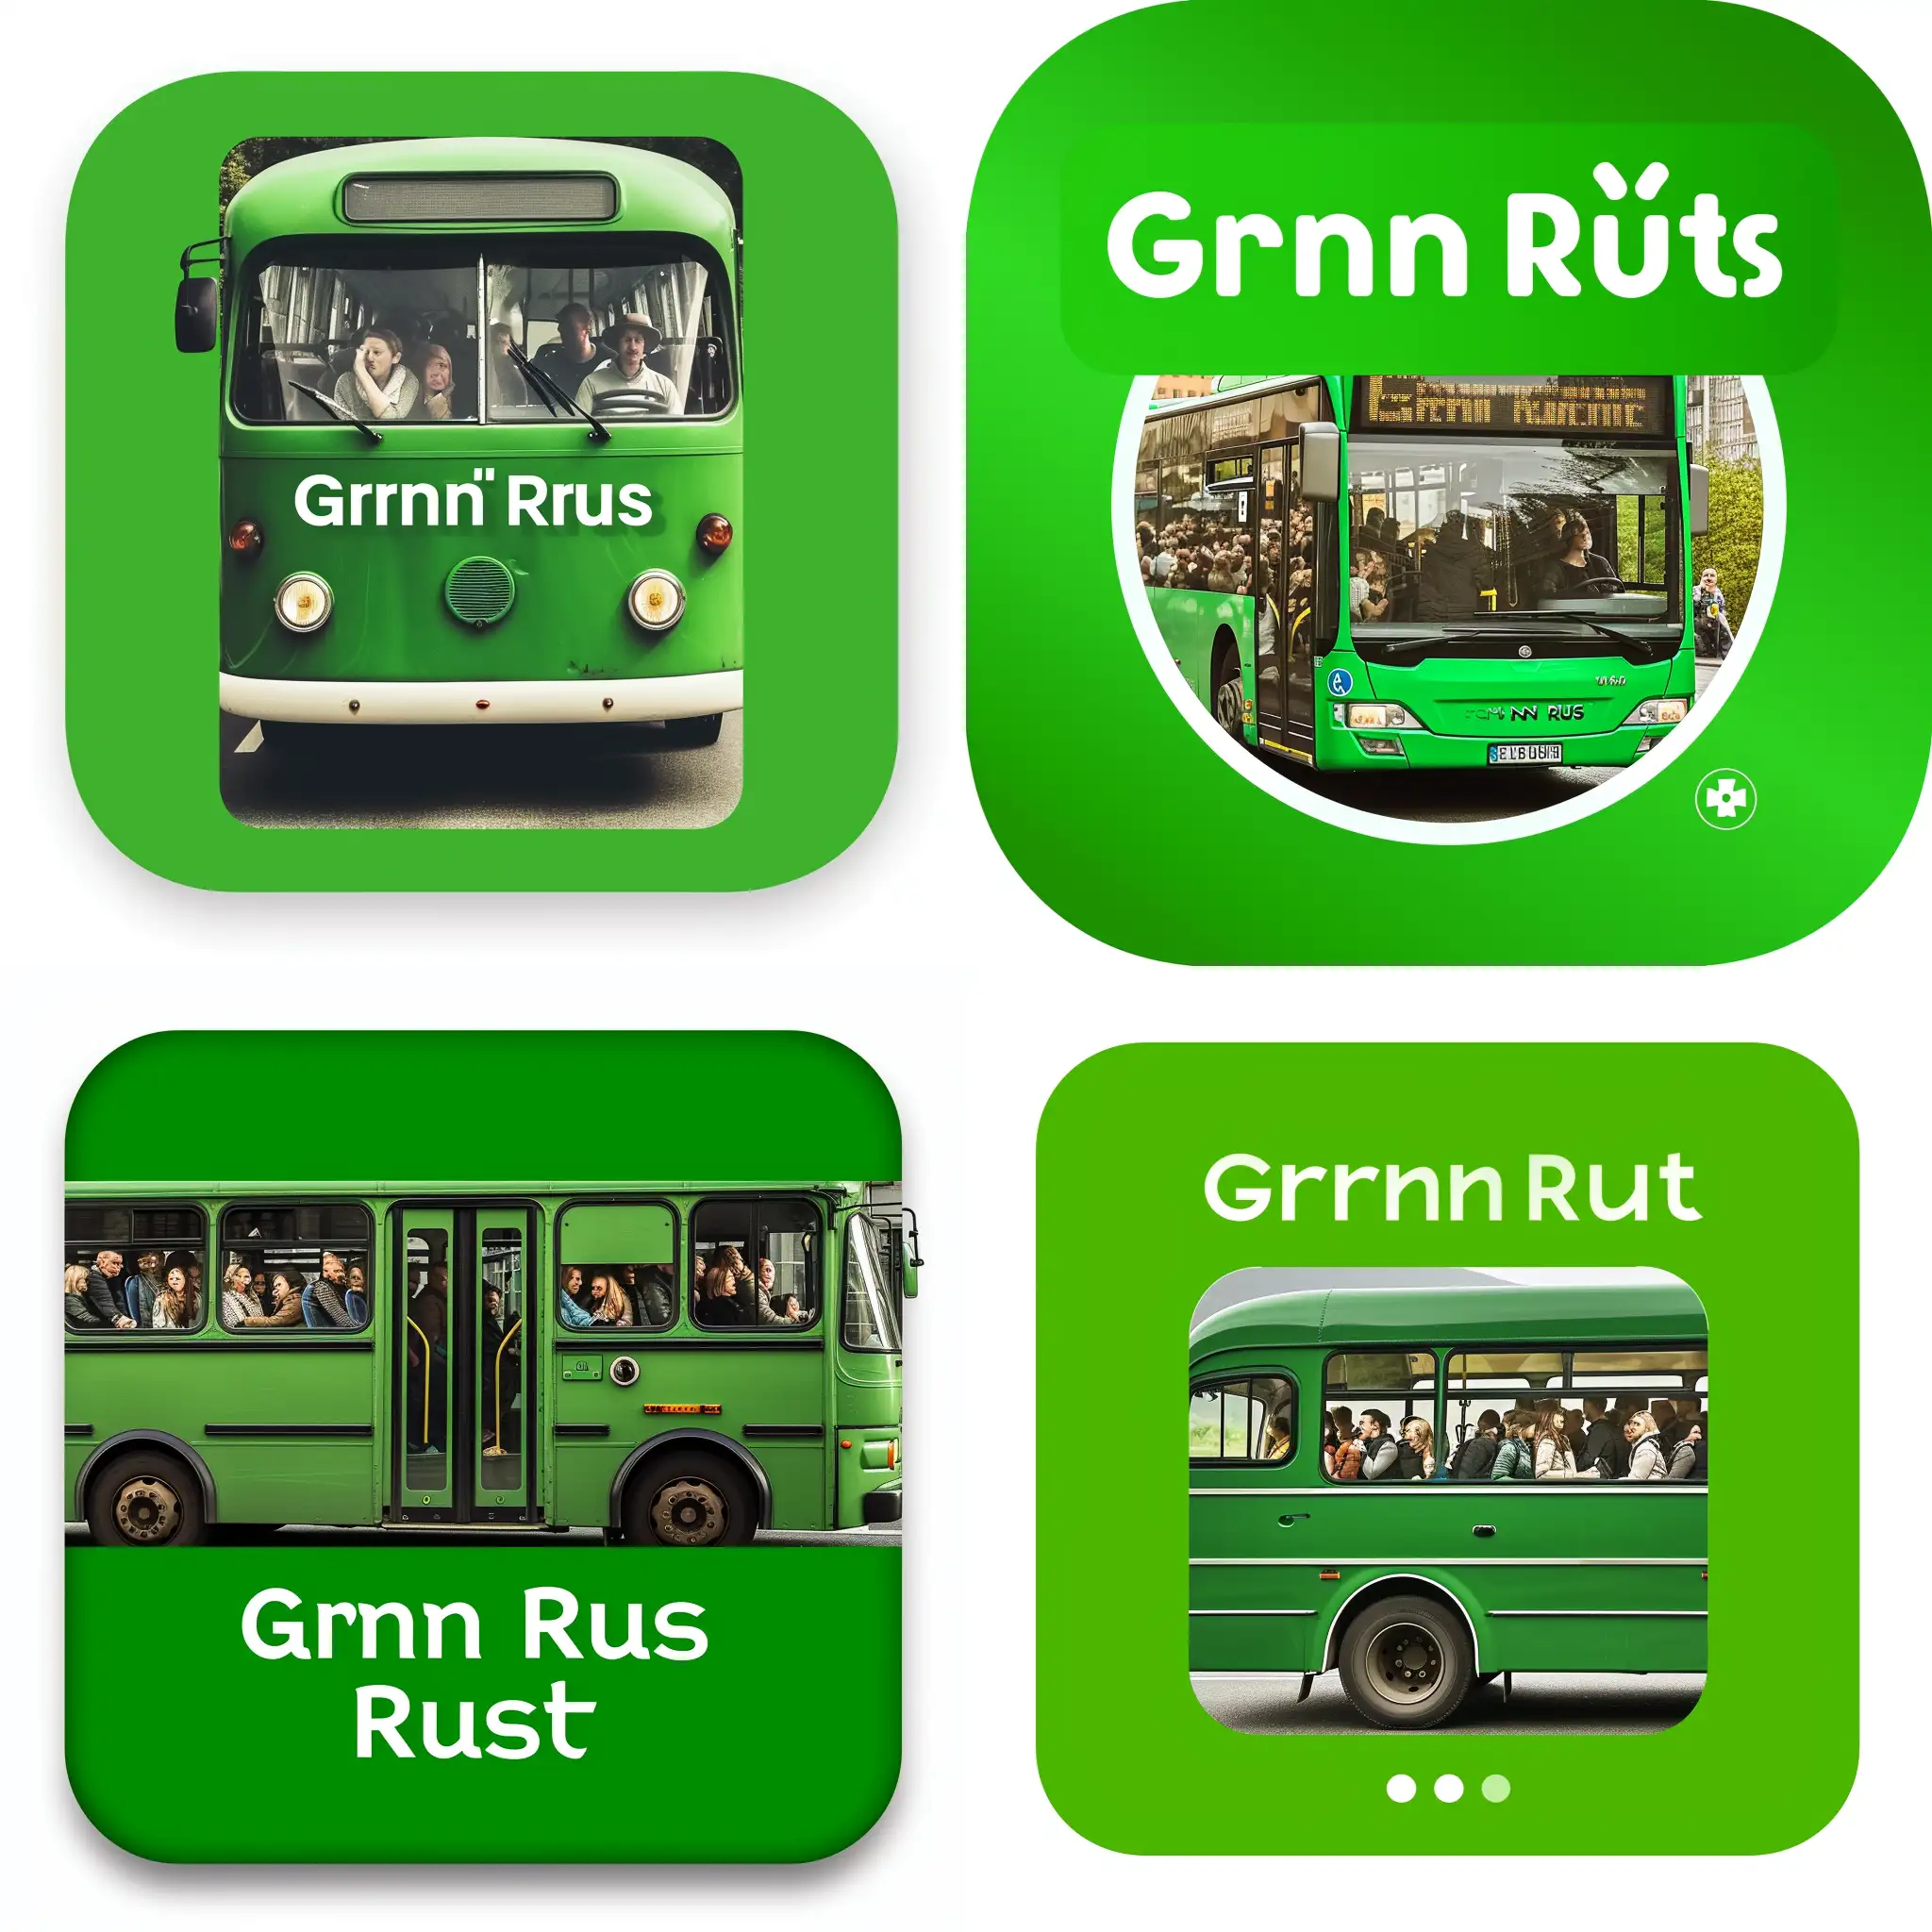 Grnn-Rute-App-Logo-Vibrant-Green-Background-with-Crowded-Green-Bus